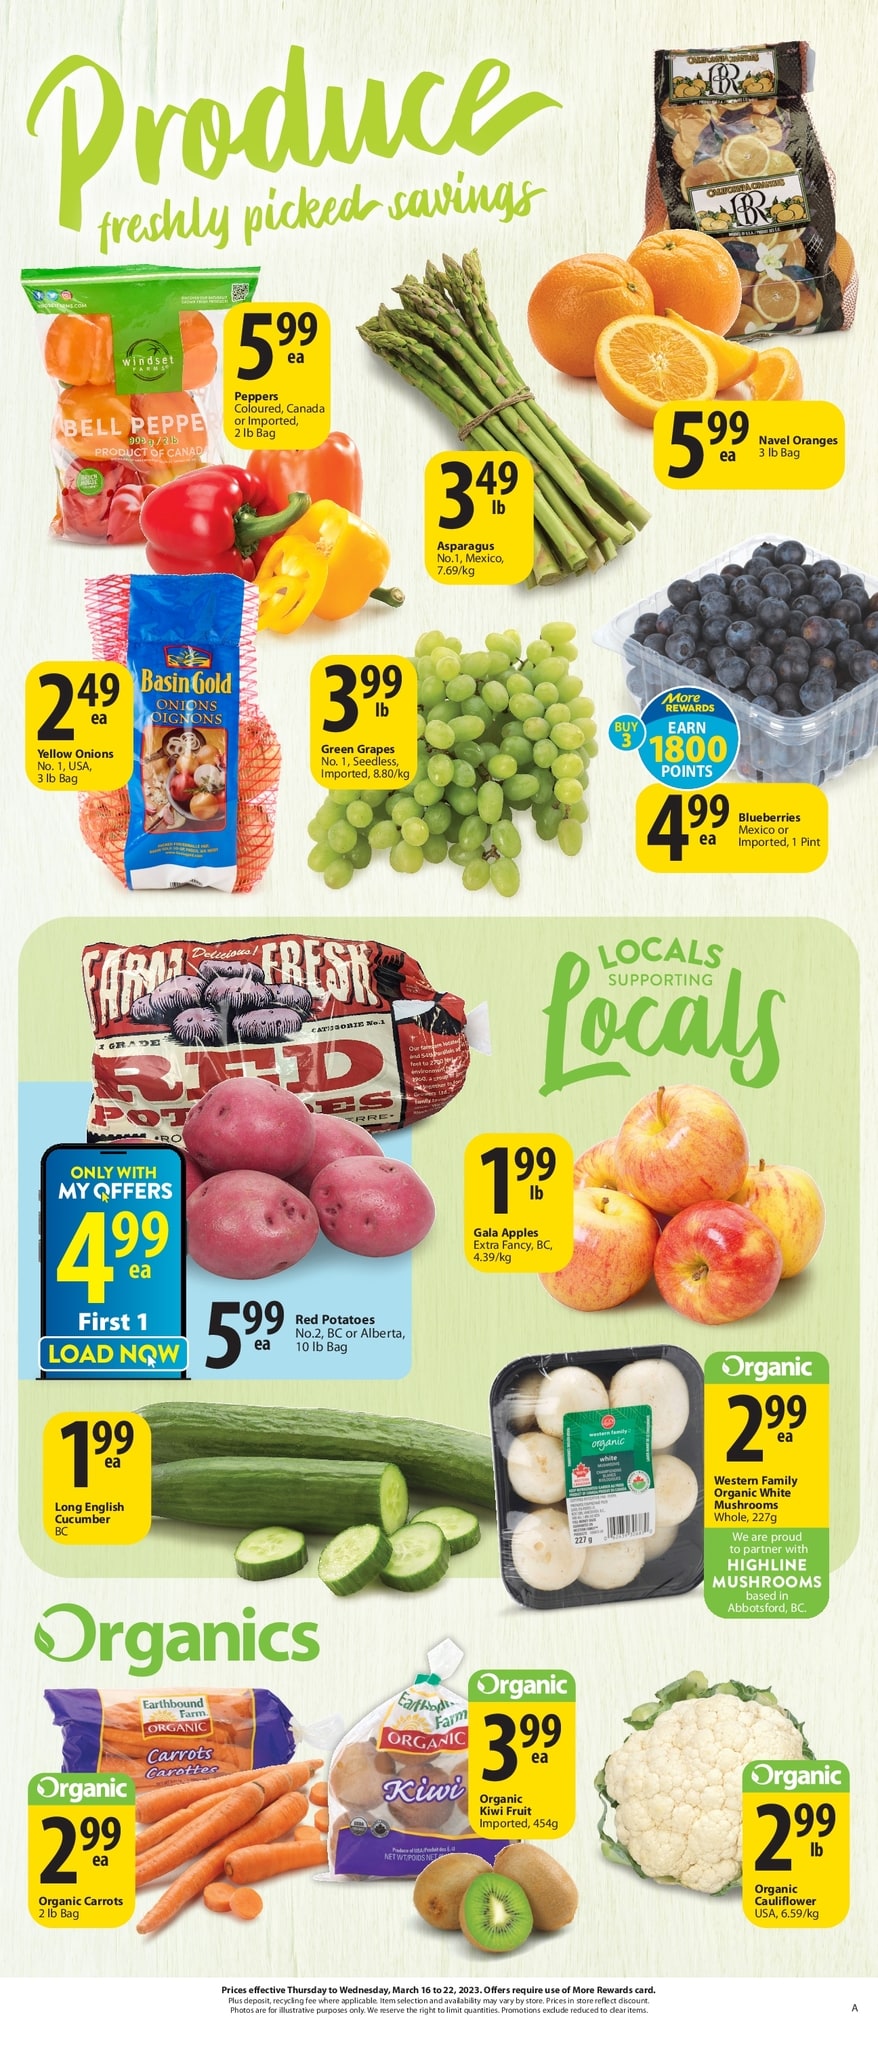 Save-On-Foods - Weekly Flyer Specials - Page 3